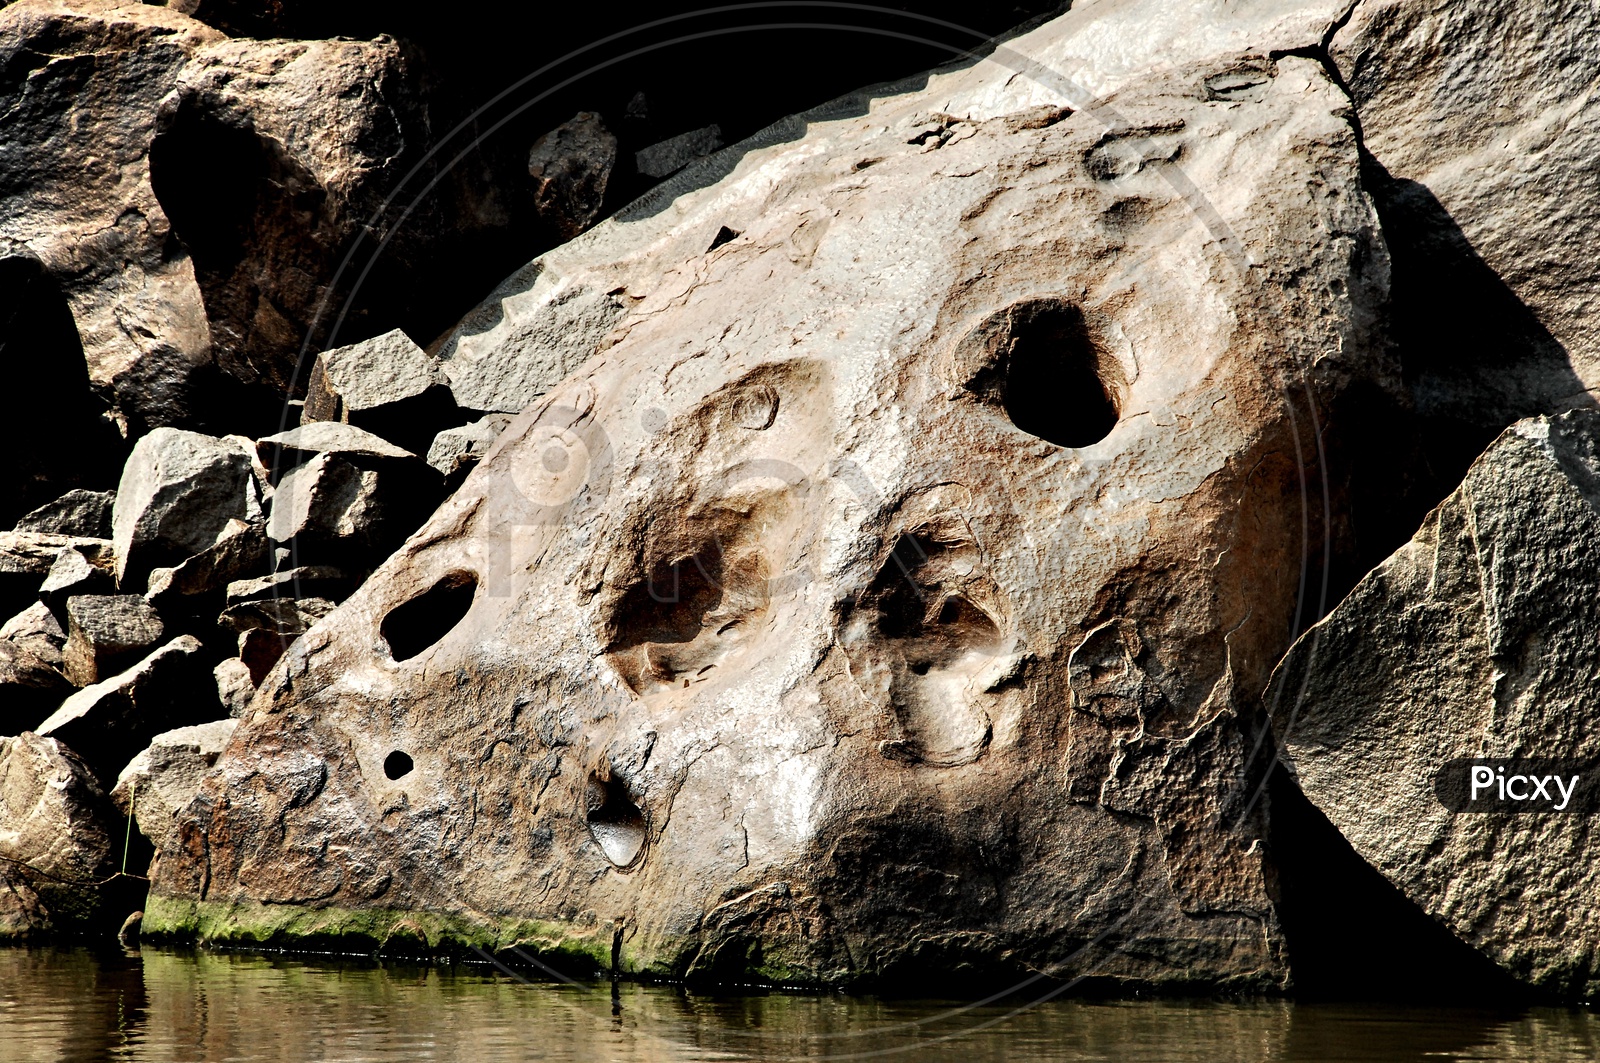 A rock with holes beside a lake